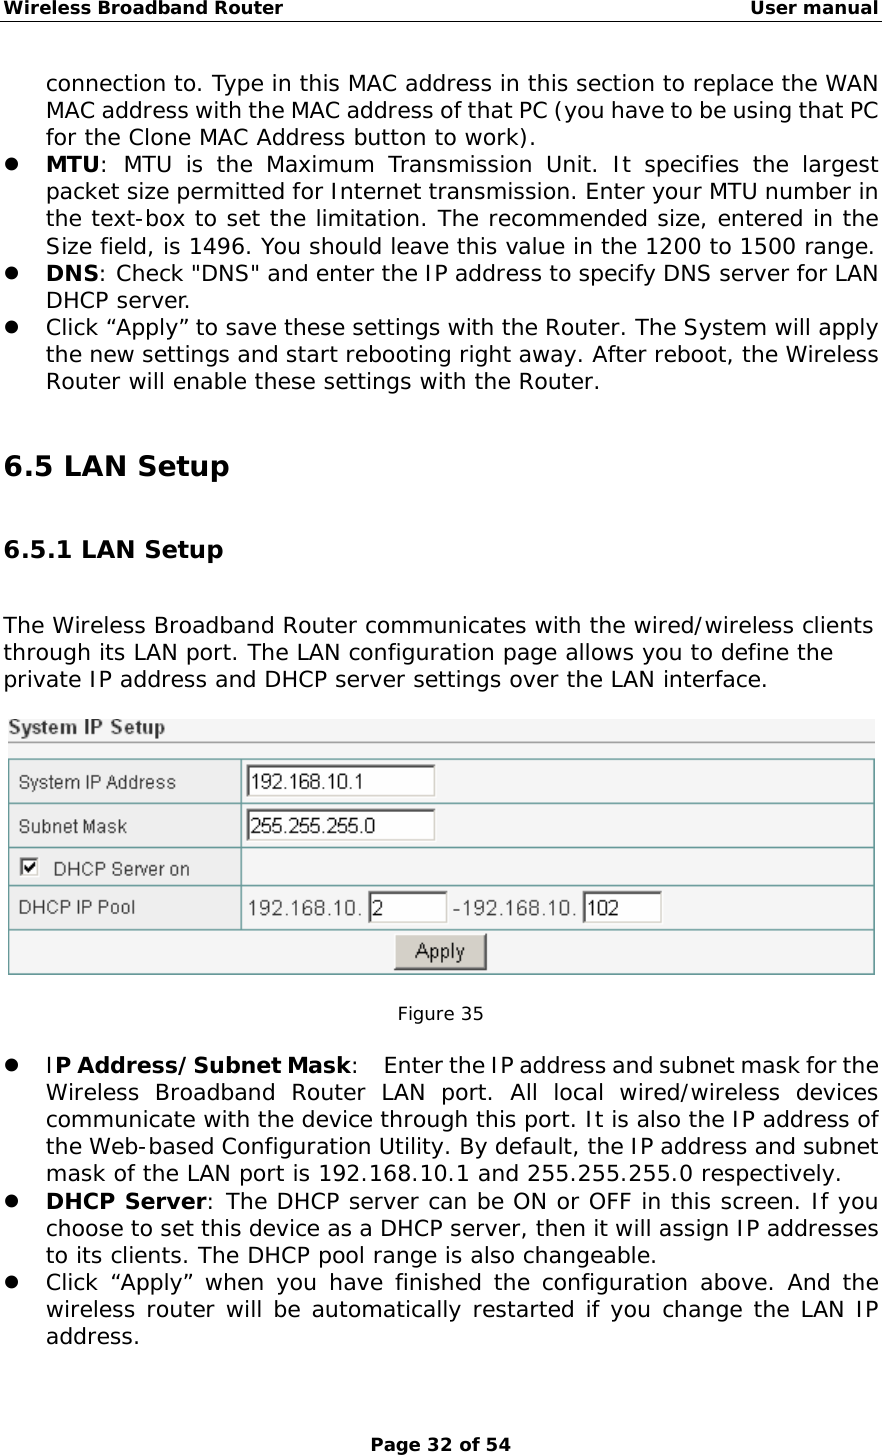 Wireless Broadband Router                                                   User manual Page 32 of 54 connection to. Type in this MAC address in this section to replace the WAN MAC address with the MAC address of that PC (you have to be using that PC for the Clone MAC Address button to work). z MTU: MTU is the Maximum Transmission Unit. It specifies the largest packet size permitted for Internet transmission. Enter your MTU number in the text-box to set the limitation. The recommended size, entered in the Size field, is 1496. You should leave this value in the 1200 to 1500 range. z DNS: Check &quot;DNS&quot; and enter the IP address to specify DNS server for LAN DHCP server. z Click “Apply” to save these settings with the Router. The System will apply the new settings and start rebooting right away. After reboot, the Wireless Router will enable these settings with the Router.  6.5 LAN Setup 6.5.1 LAN Setup The Wireless Broadband Router communicates with the wired/wireless clients through its LAN port. The LAN configuration page allows you to define the private IP address and DHCP server settings over the LAN interface.    Figure 35  z IP Address/Subnet Mask:    Enter the IP address and subnet mask for the Wireless Broadband Router LAN port. All local wired/wireless devices communicate with the device through this port. It is also the IP address of the Web-based Configuration Utility. By default, the IP address and subnet mask of the LAN port is 192.168.10.1 and 255.255.255.0 respectively.  z DHCP Server: The DHCP server can be ON or OFF in this screen. If you choose to set this device as a DHCP server, then it will assign IP addresses to its clients. The DHCP pool range is also changeable.  z Click “Apply” when you have finished the configuration above. And the wireless router will be automatically restarted if you change the LAN IP address.  